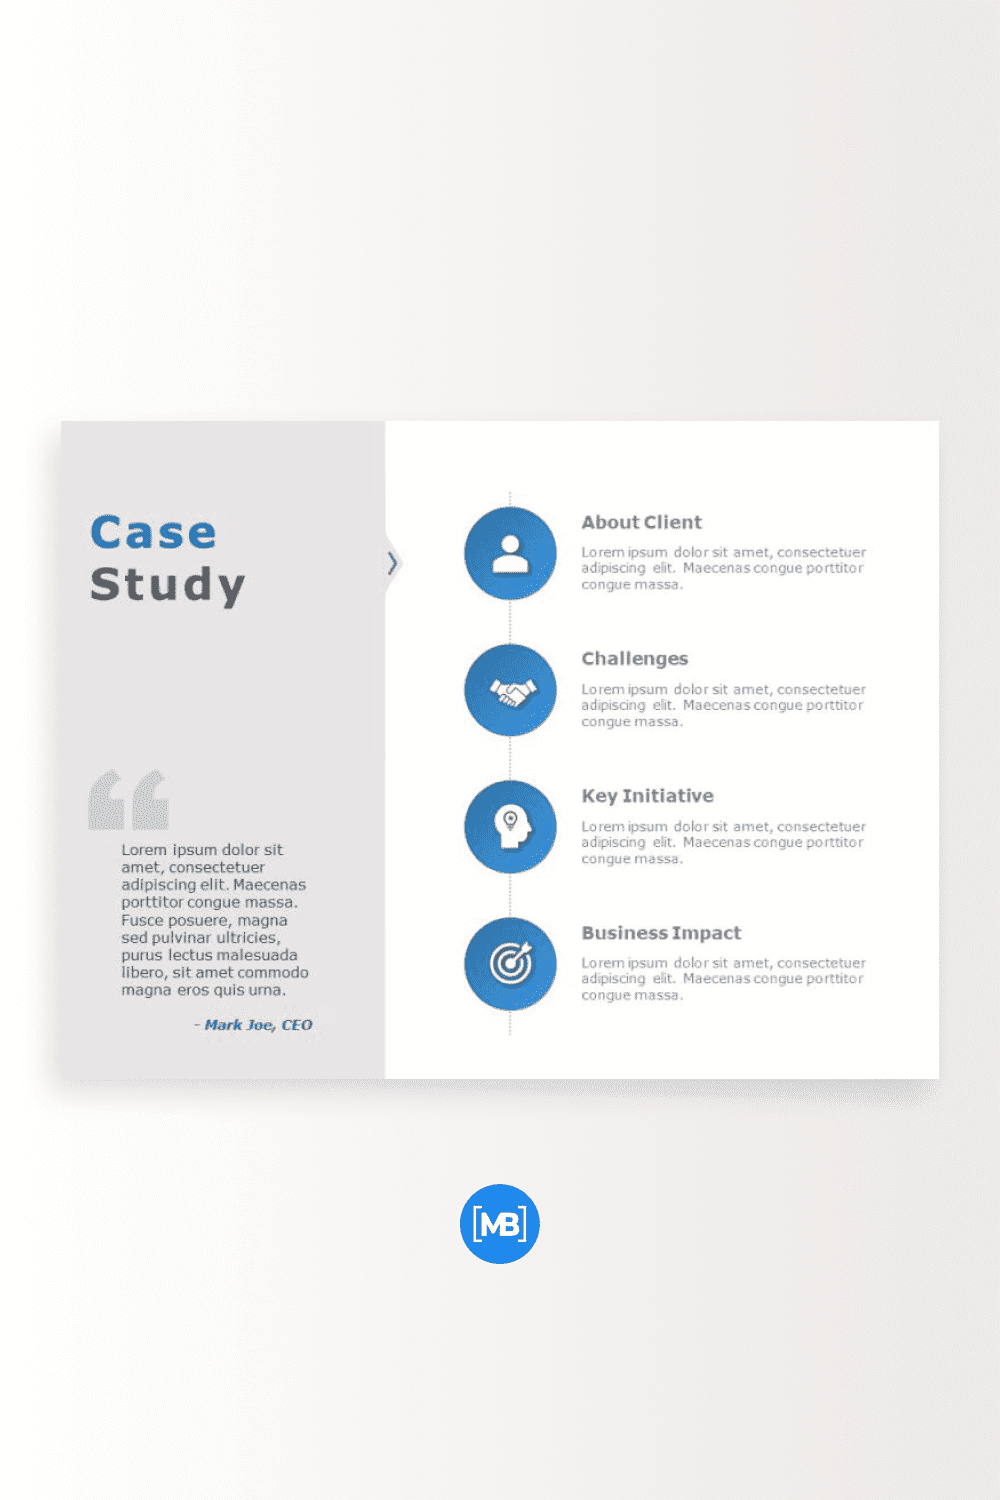 Case study powerpoint template.